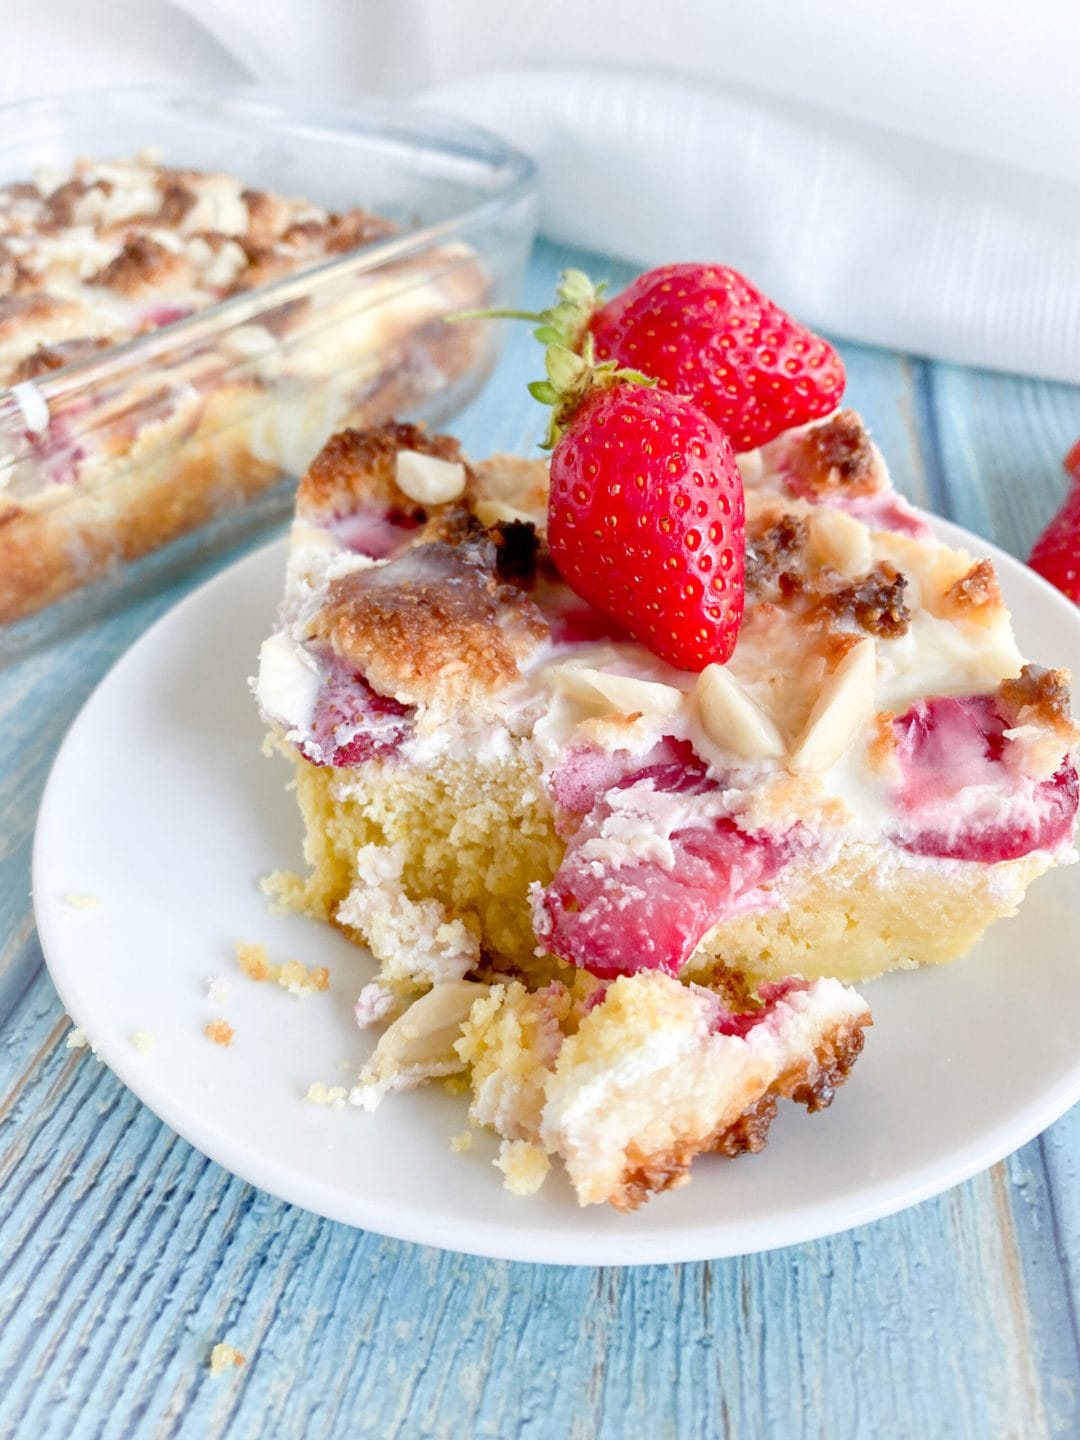 Picture of a slice of cream cheese strawberry coffee cake